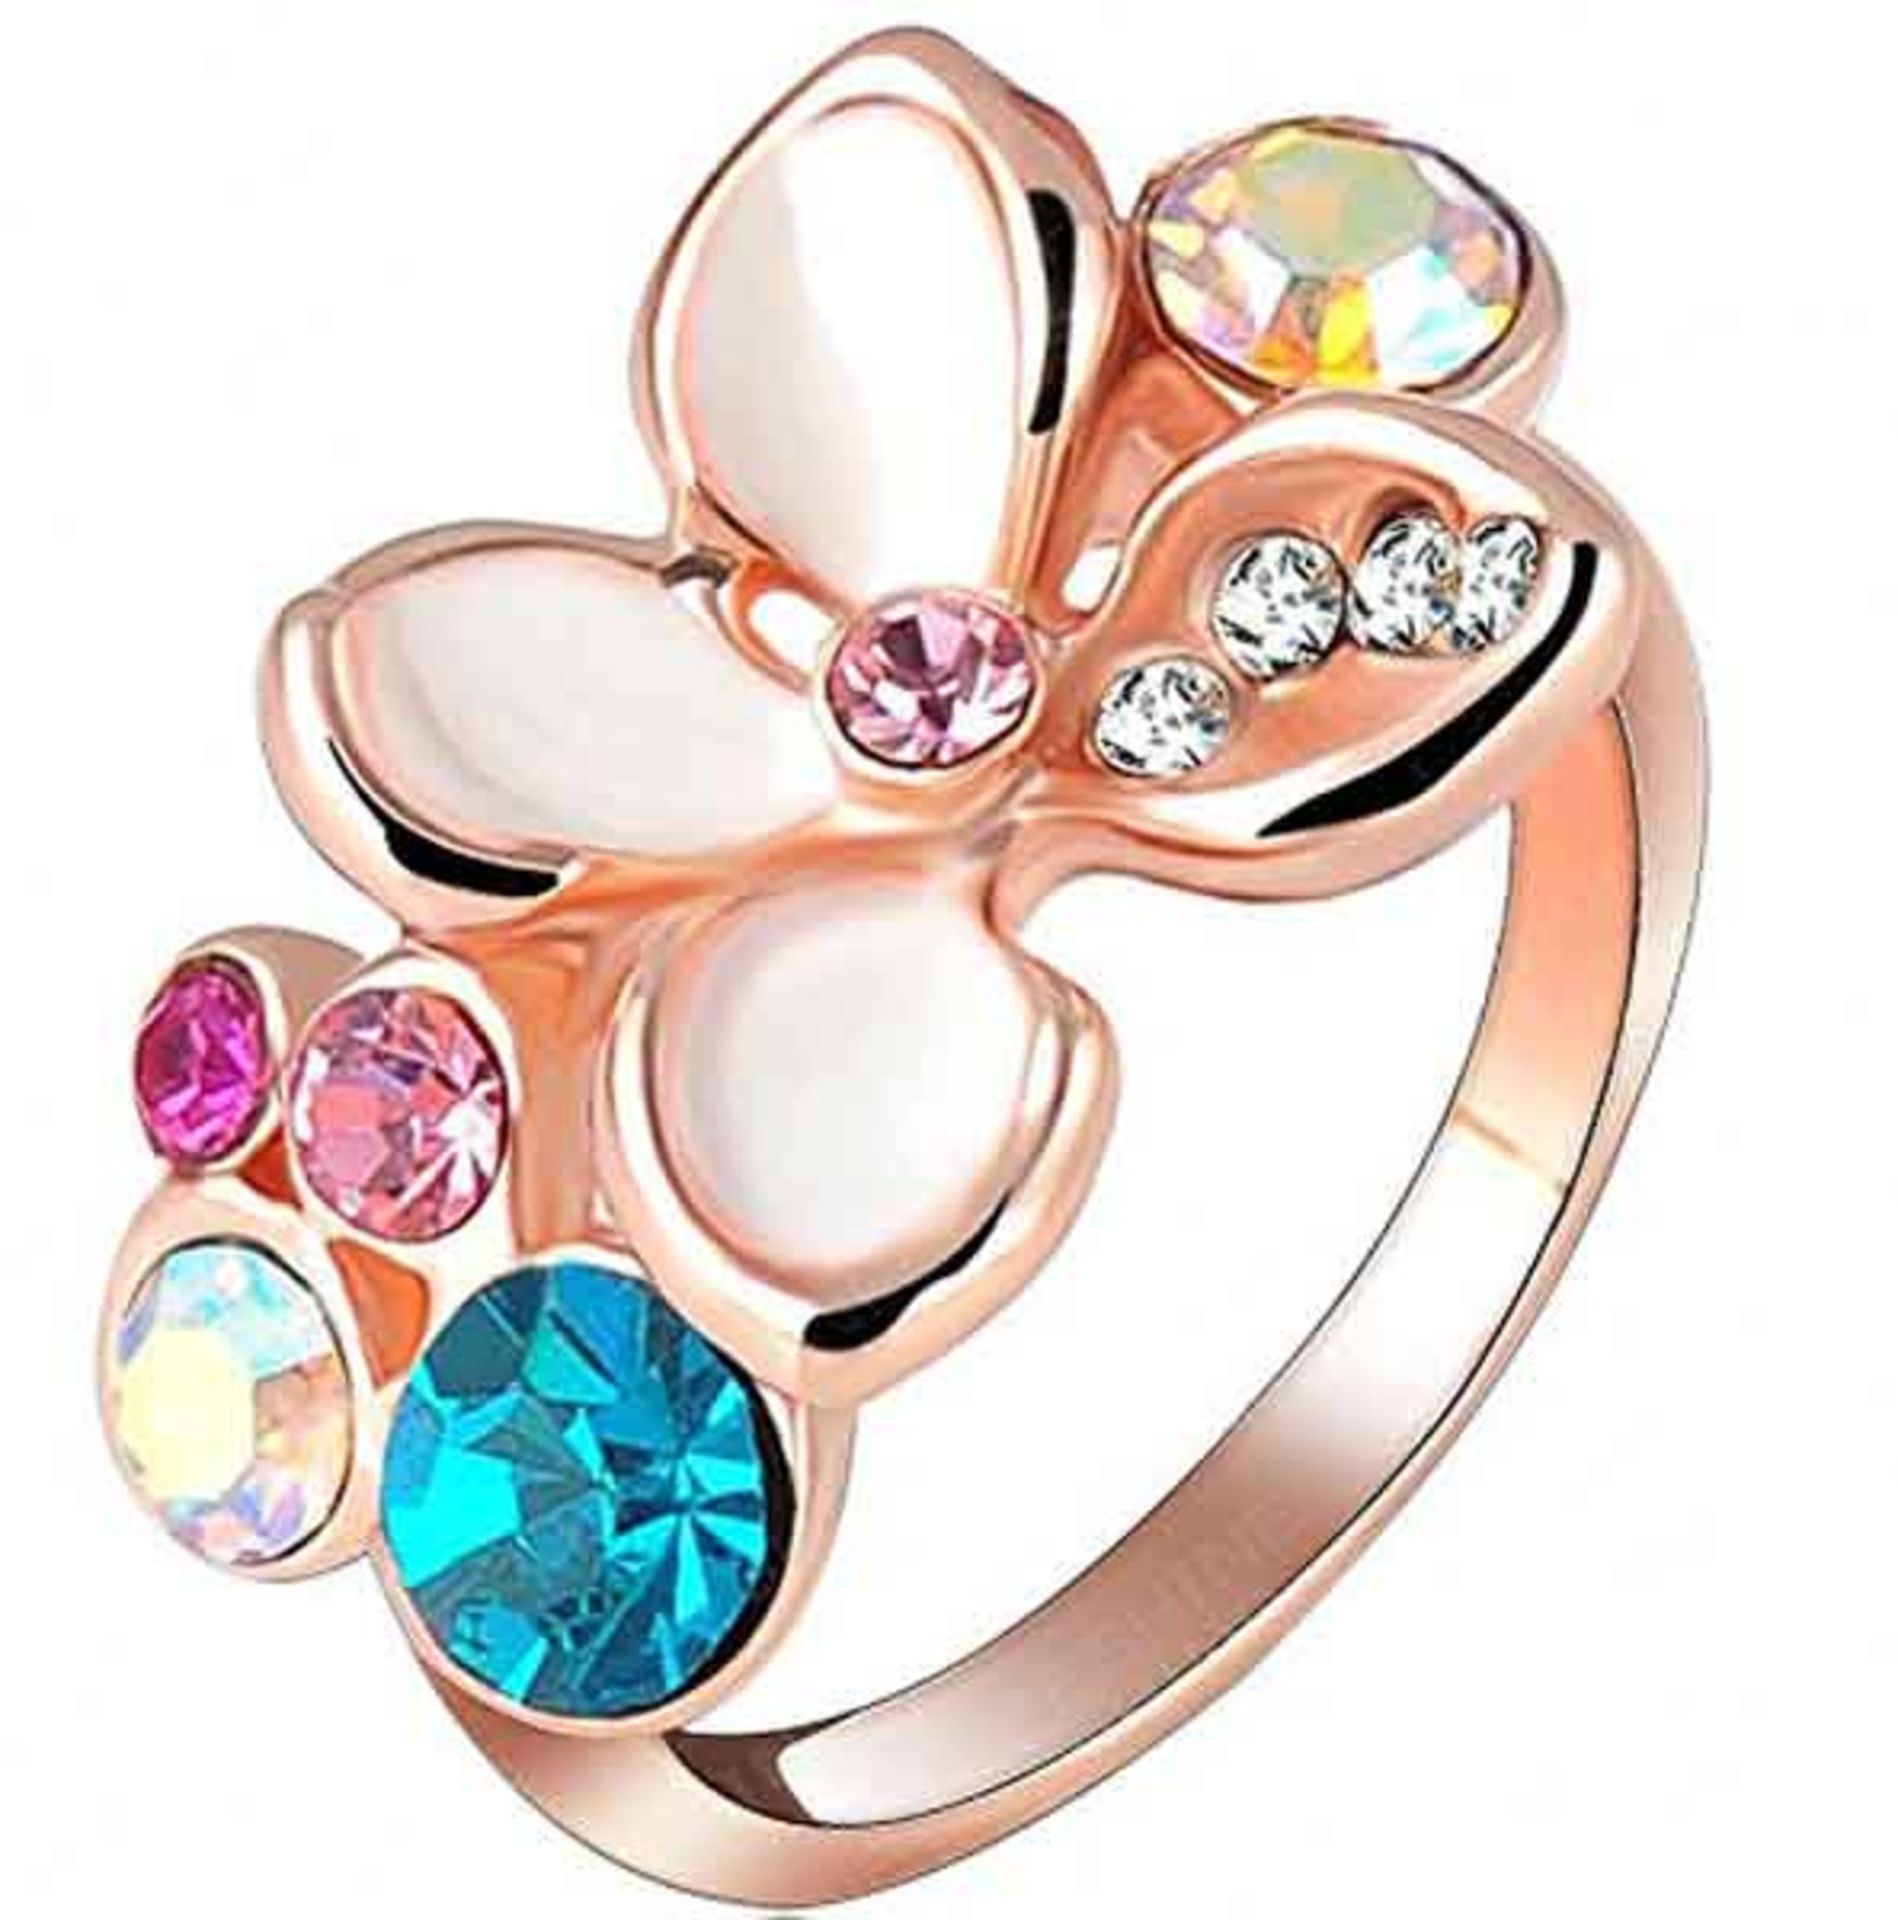 V Brand New Rose Gold Plated White Enamel and Austrian Crystal Ladies Ring